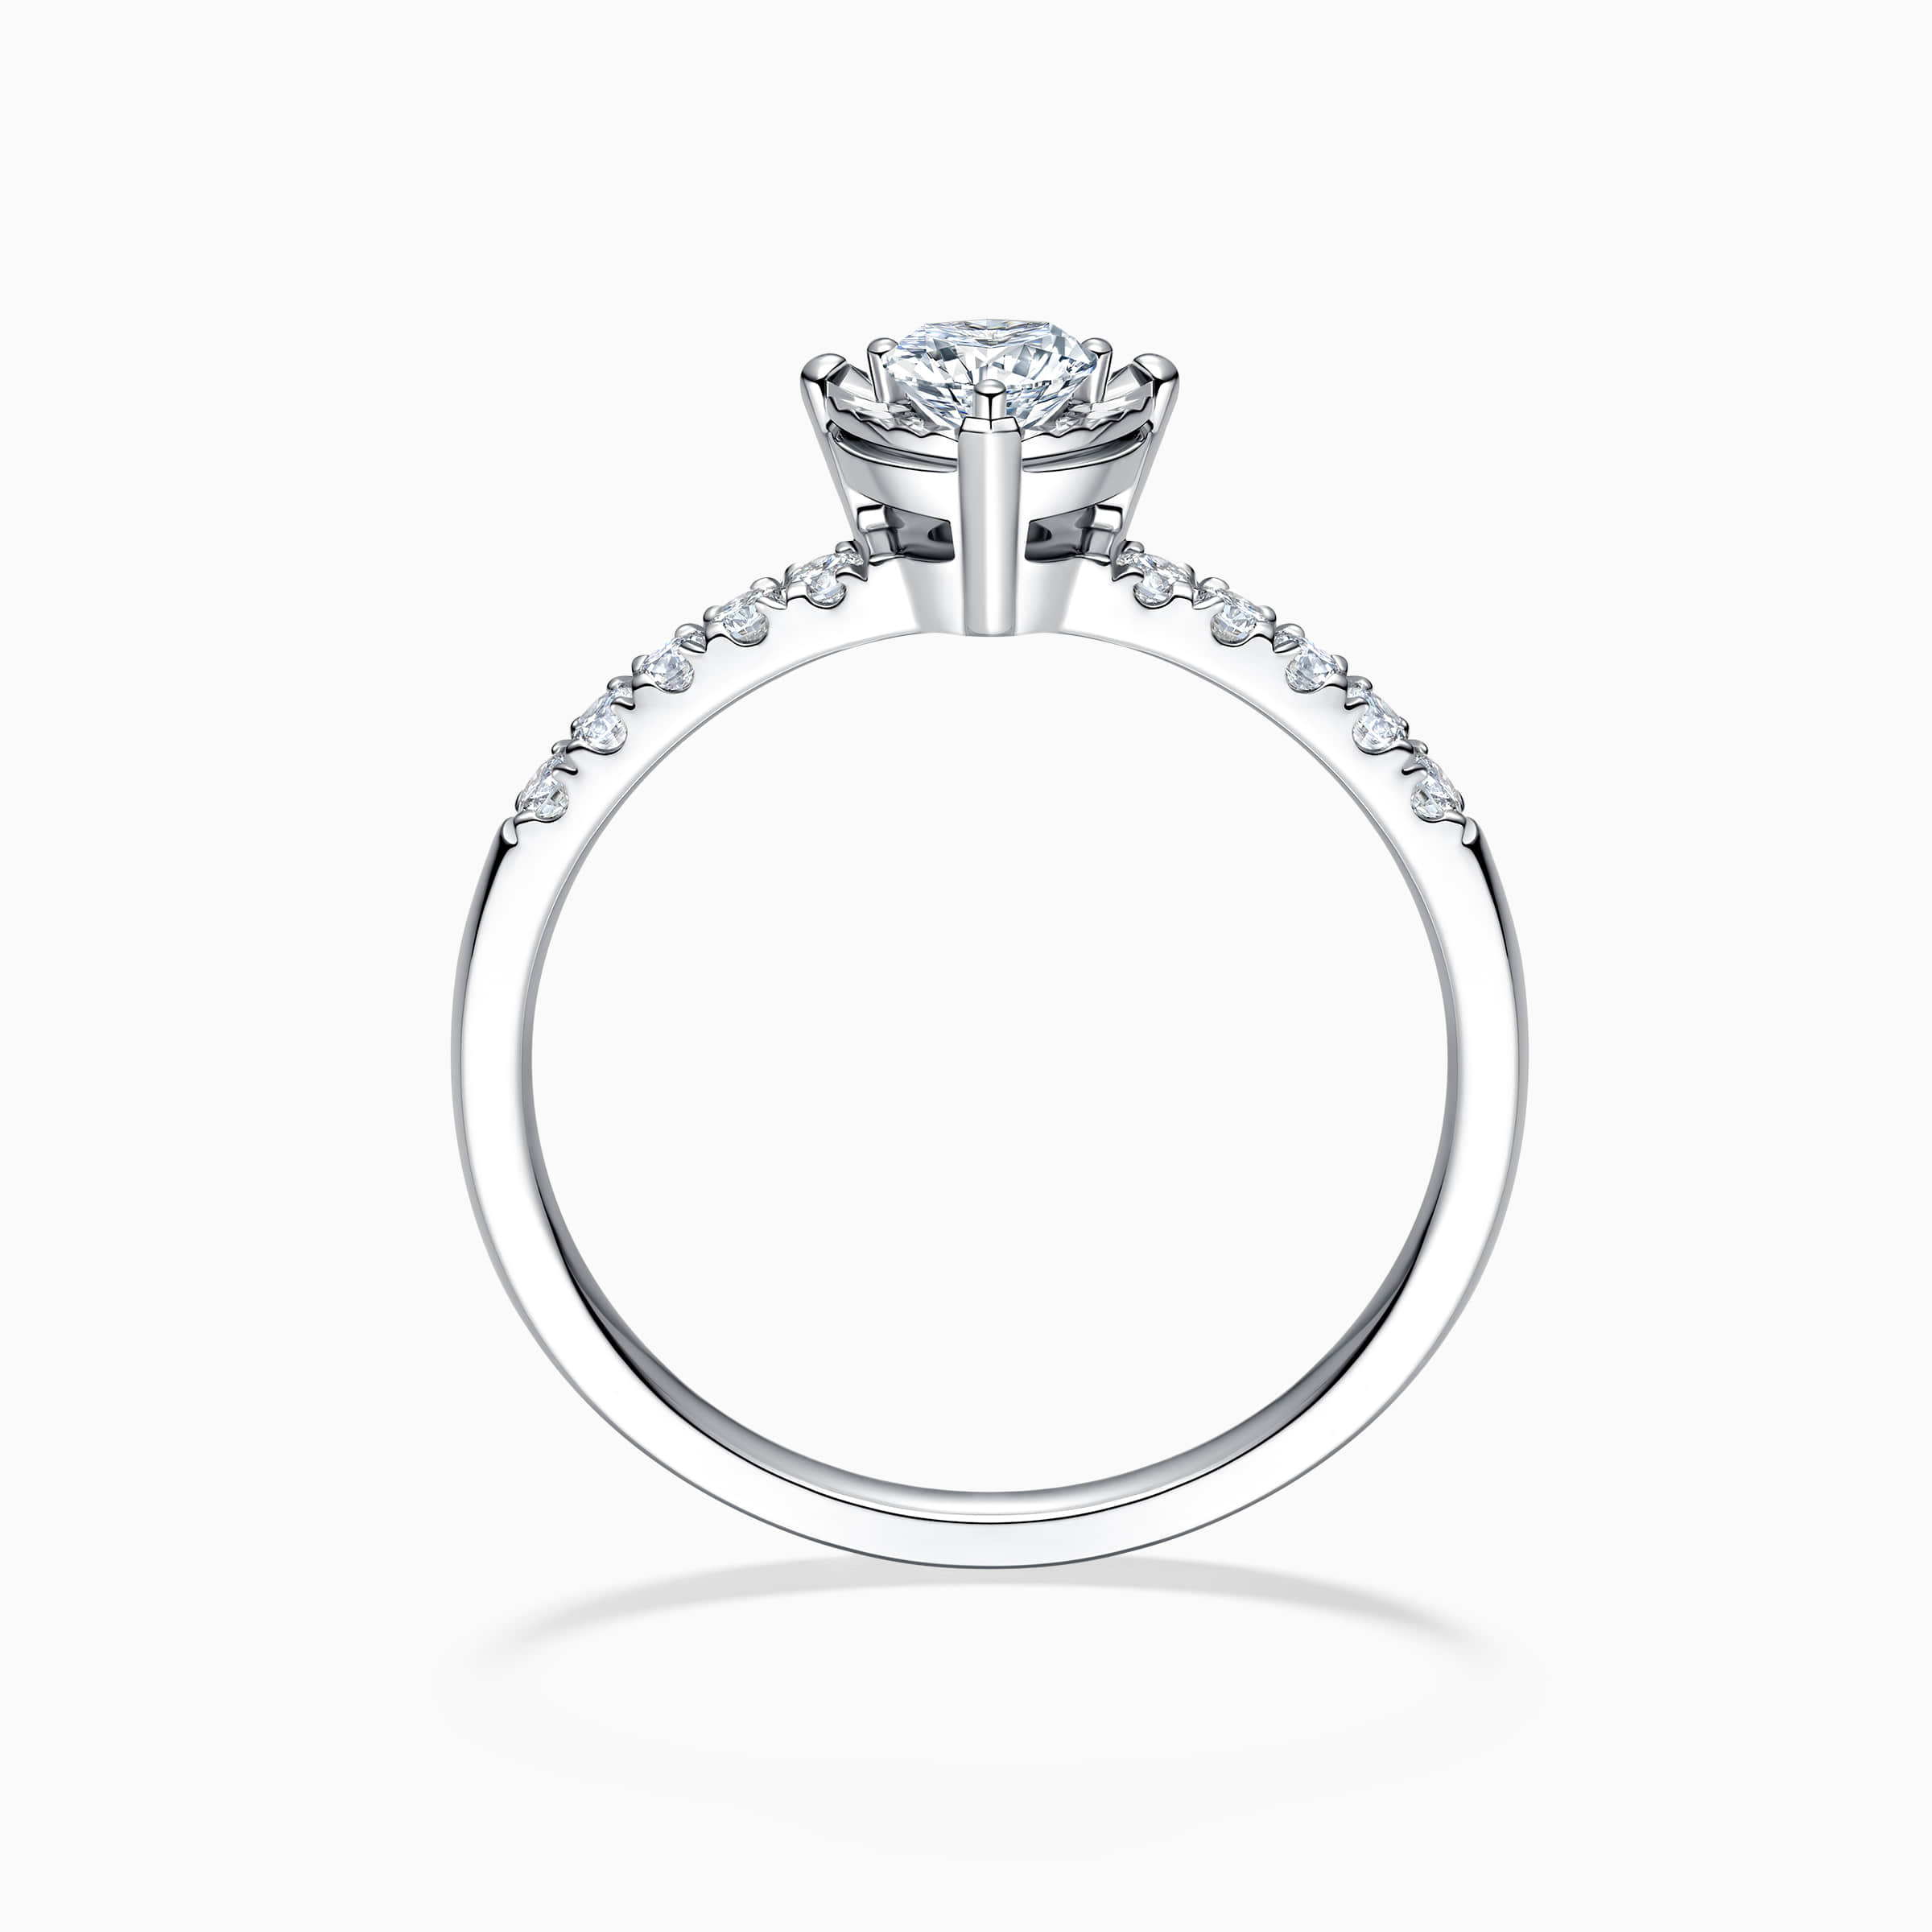 Darry Ring heart shaped diamond engagement ring white gold